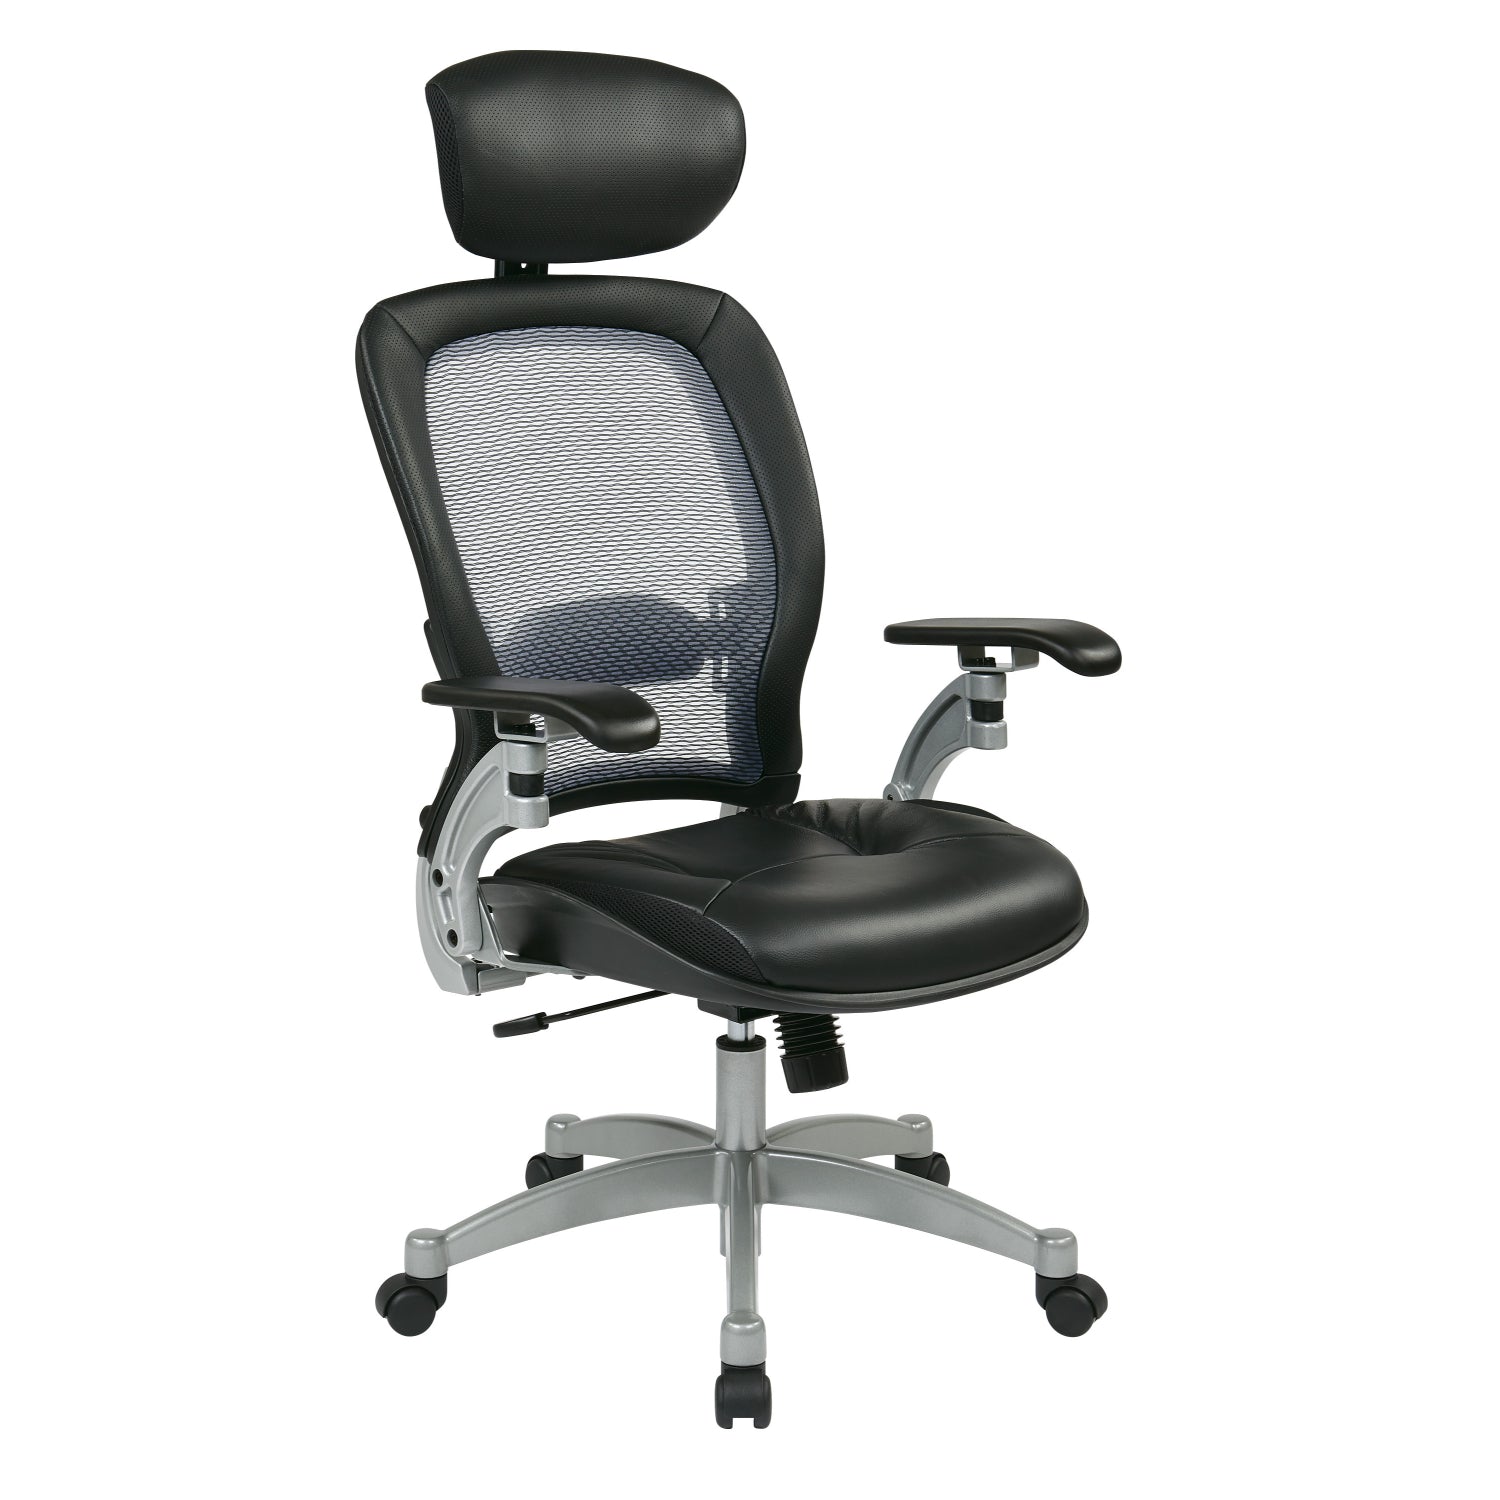 Light Air Grid® Back Executive Chair with Black Top Grain Leather Seat, Adjustable Headrest, Adjustable Lumbar and Platinum Finish Base